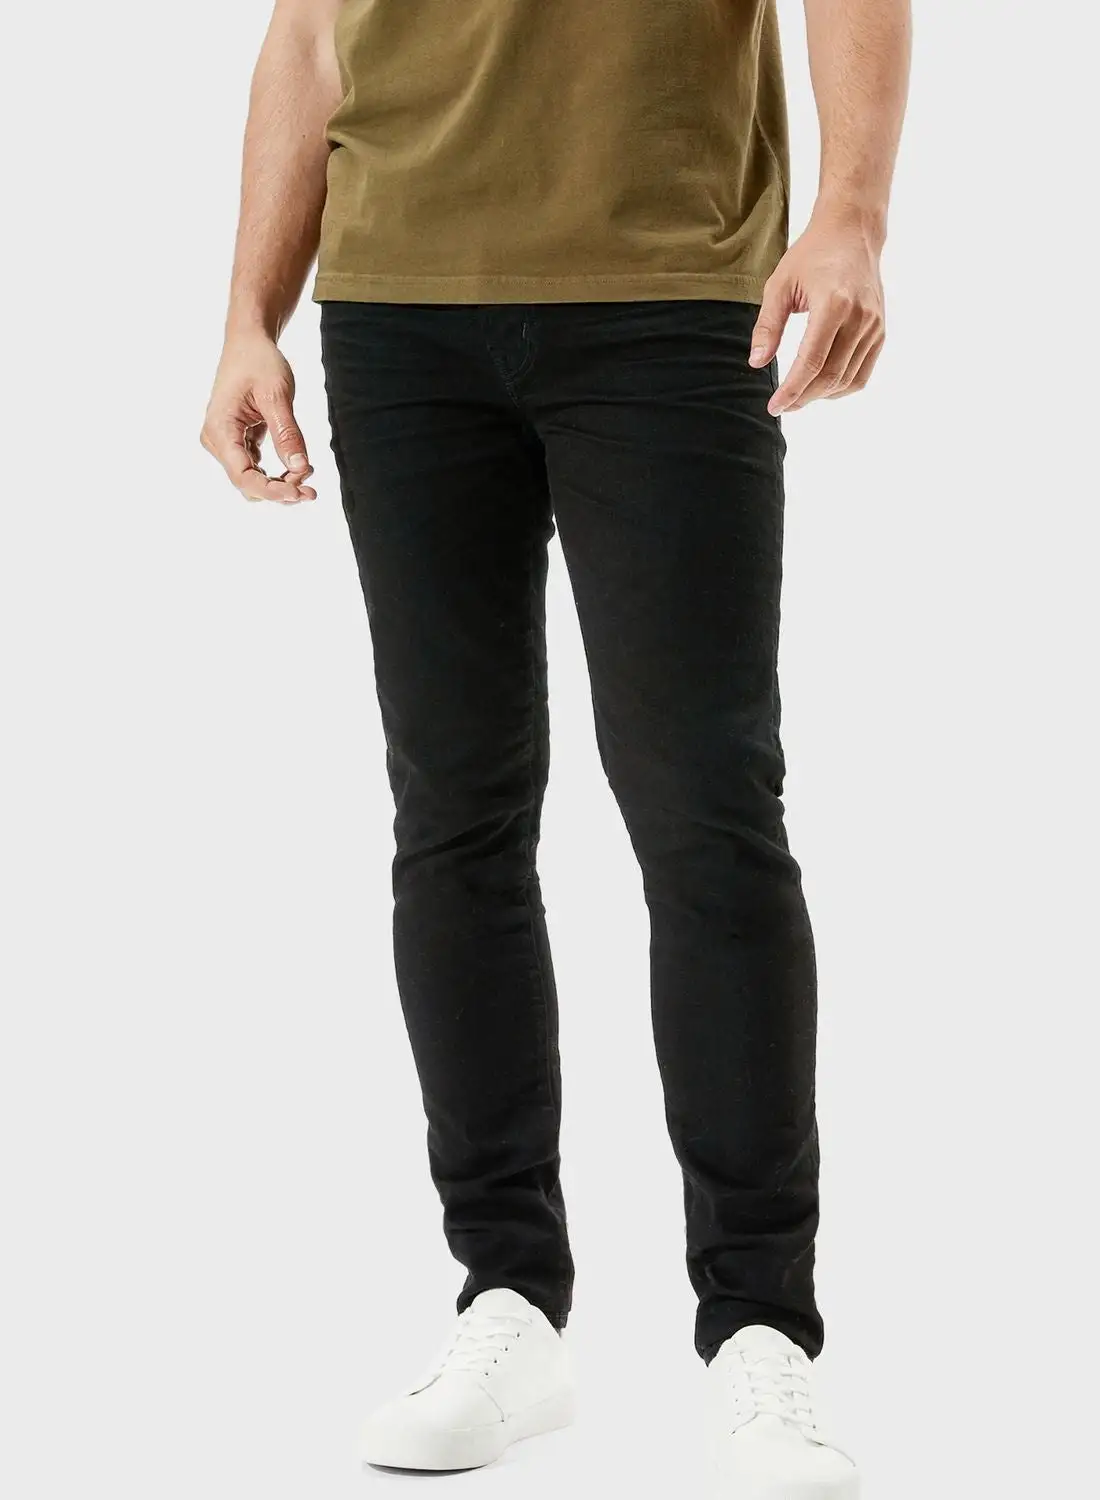 American Eagle Rinse Wash Skinny Fit Jeans